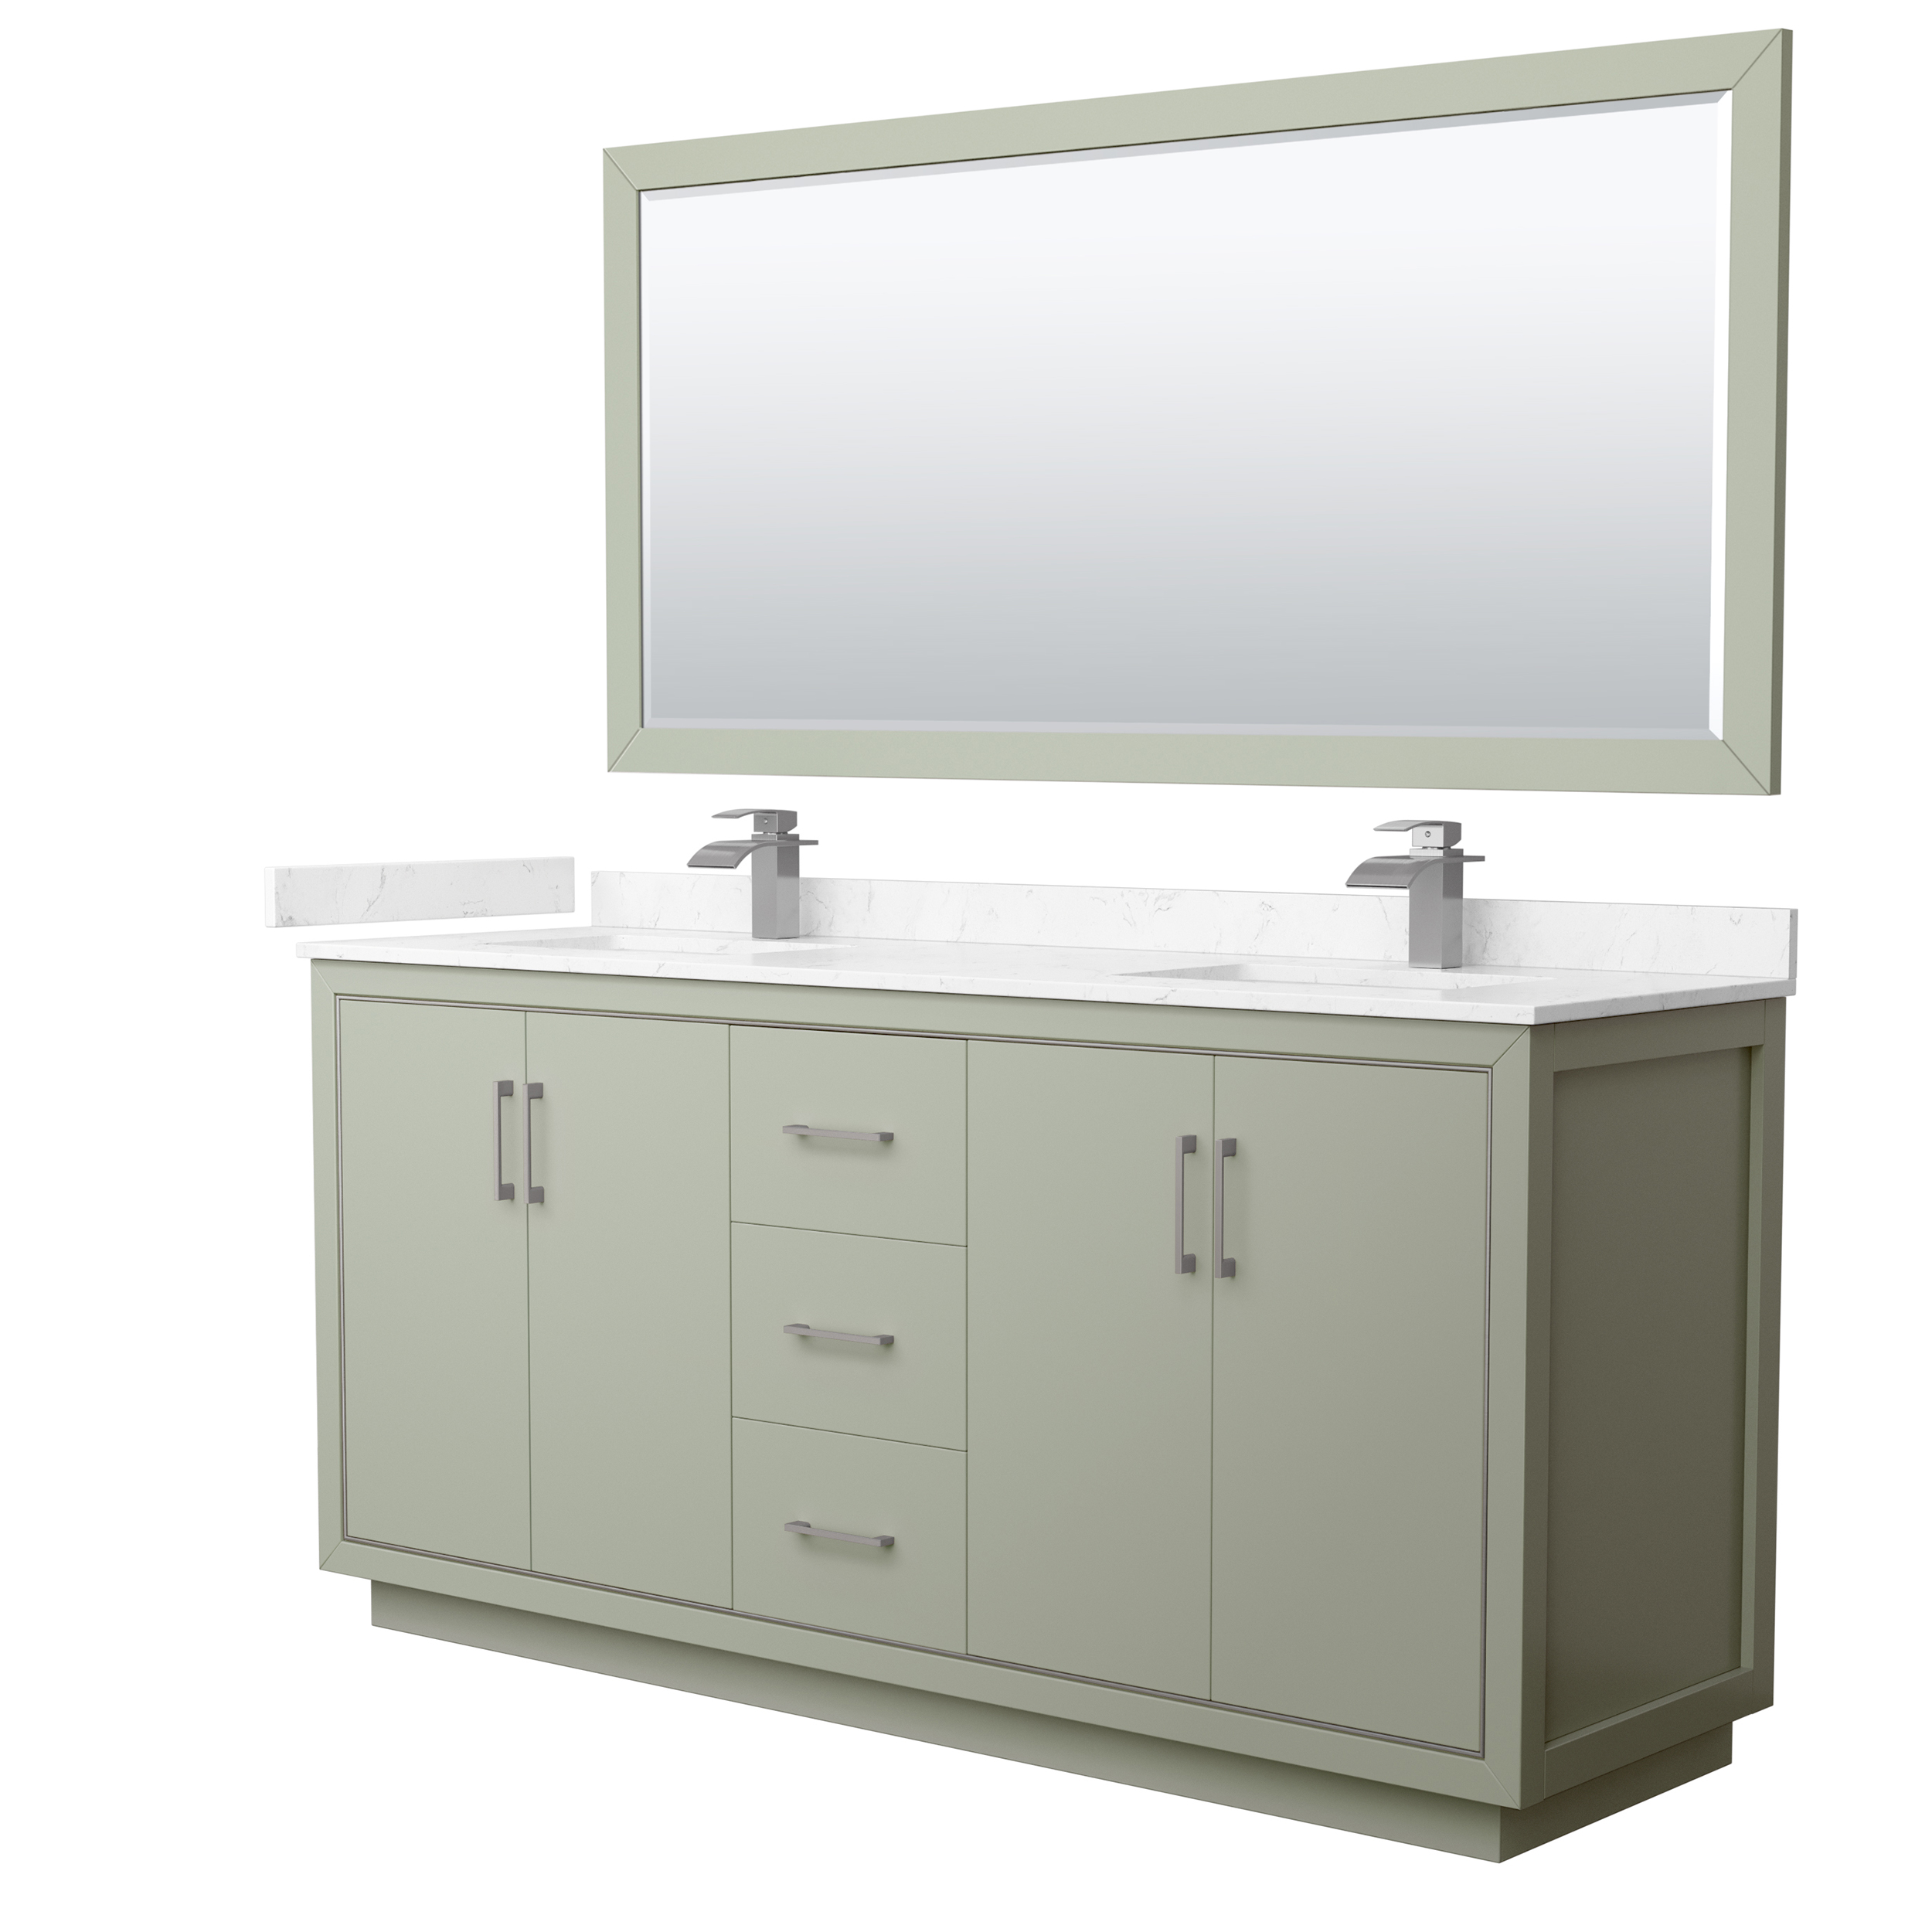 Icon 72" Double Vanity with optional Cultured Marble Counter - Dark Blue WC-1111-72-DBL-VAN-BLU-